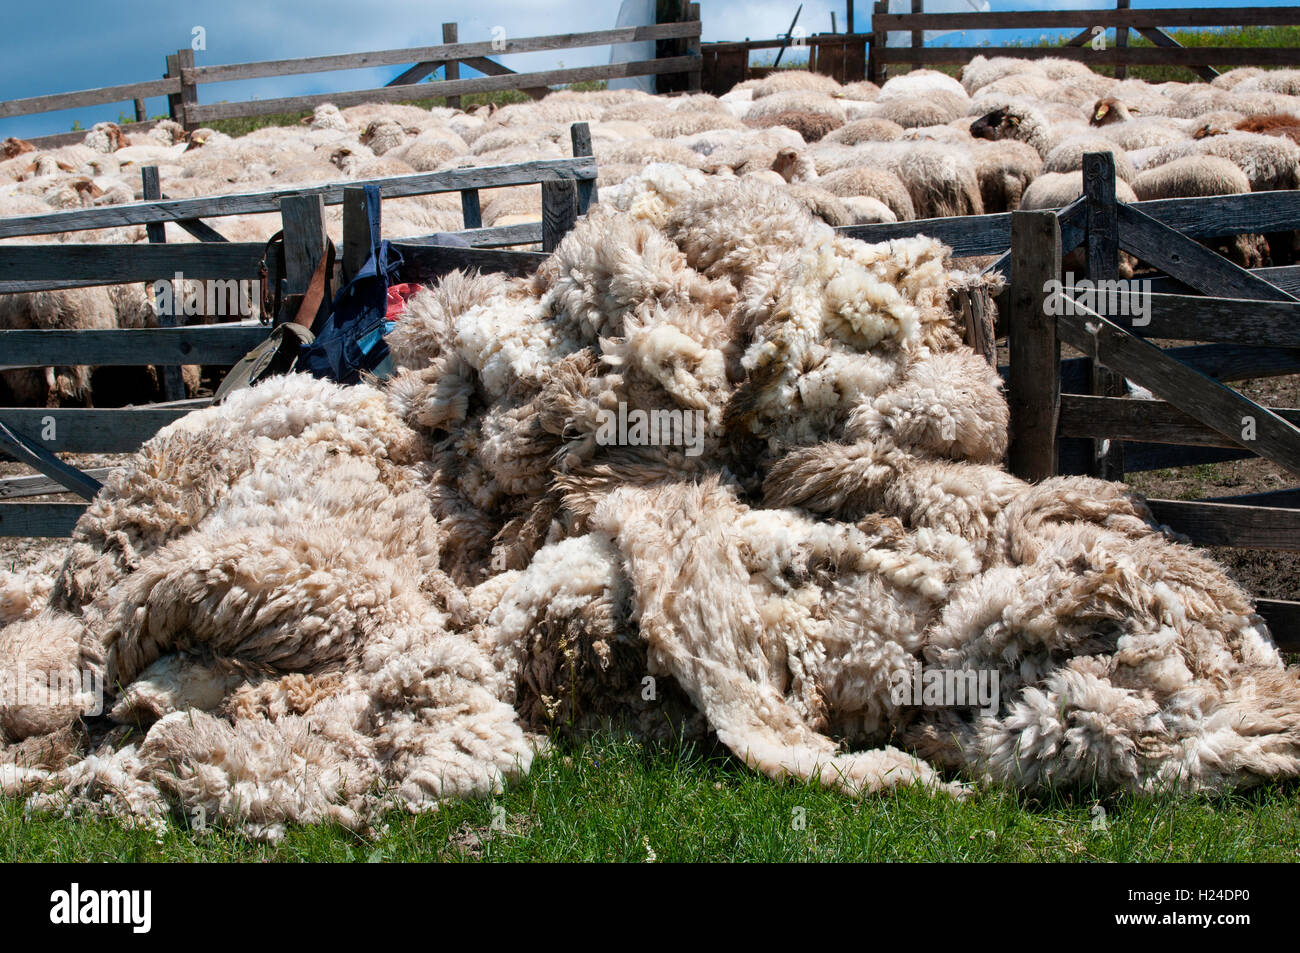 A heap of sheep wool in Romania after shearing Stock Photo - Alamy